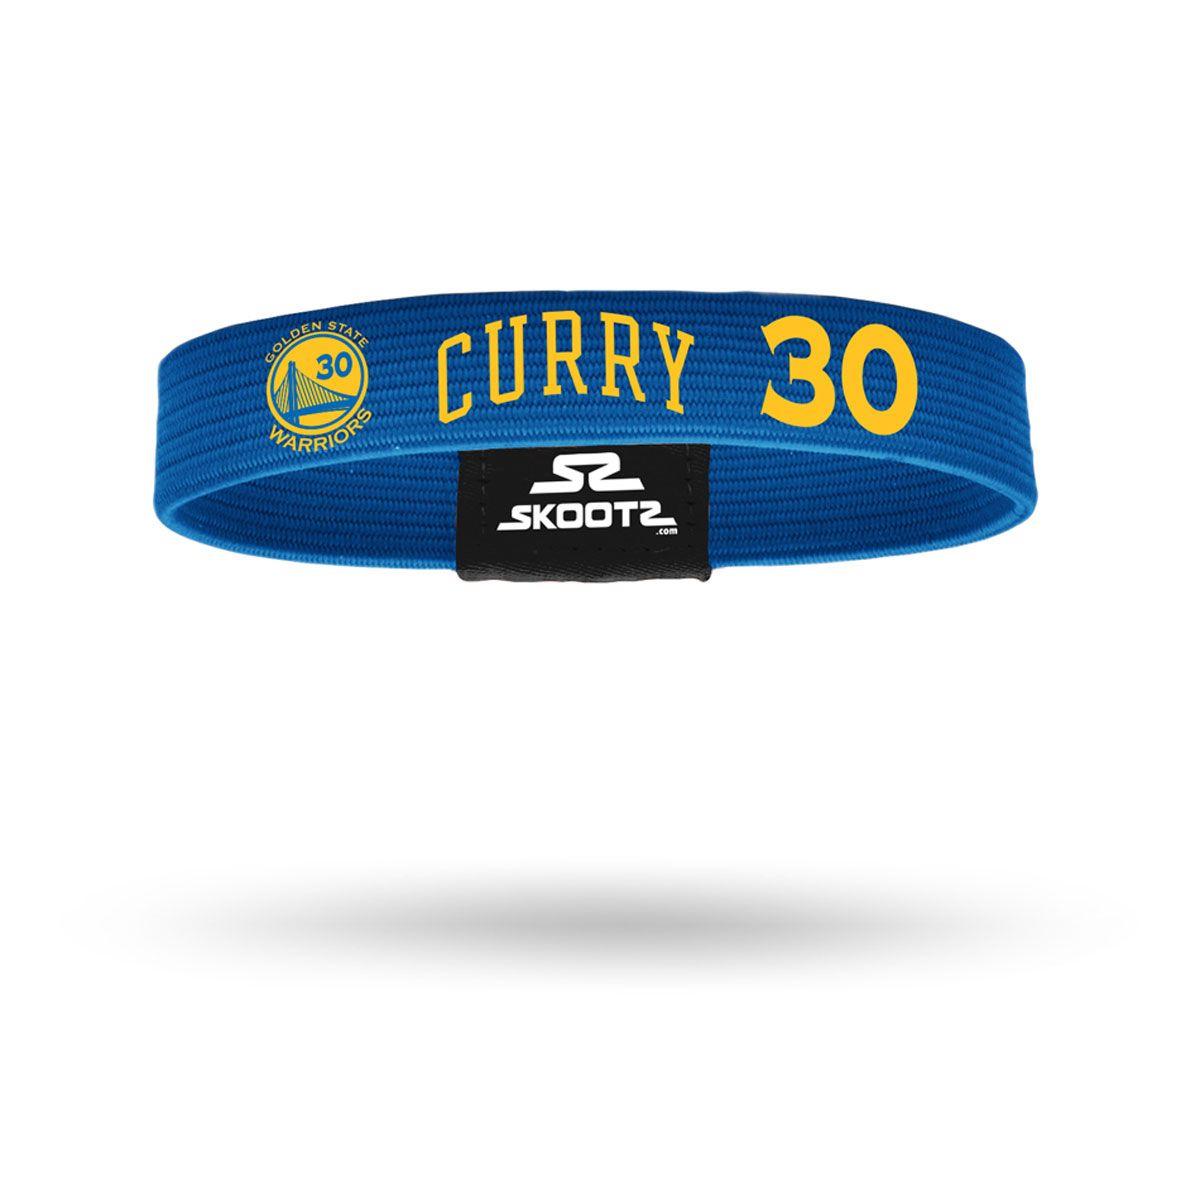 Steph Curry Logo - Golden State Warriors Aminco Stephen Curry #30 Glitter Jersey Earrings